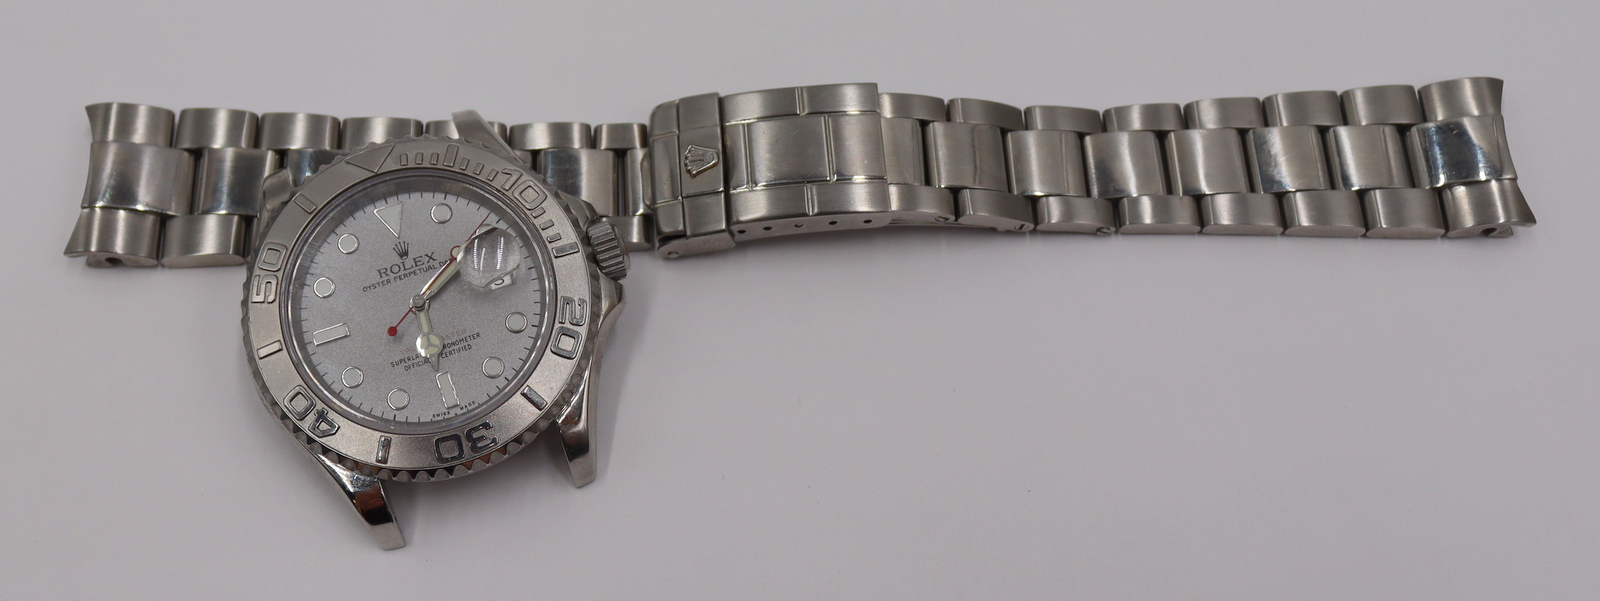 JEWELRY ROLEX OYSTER PERPETUAL 3bd7b2